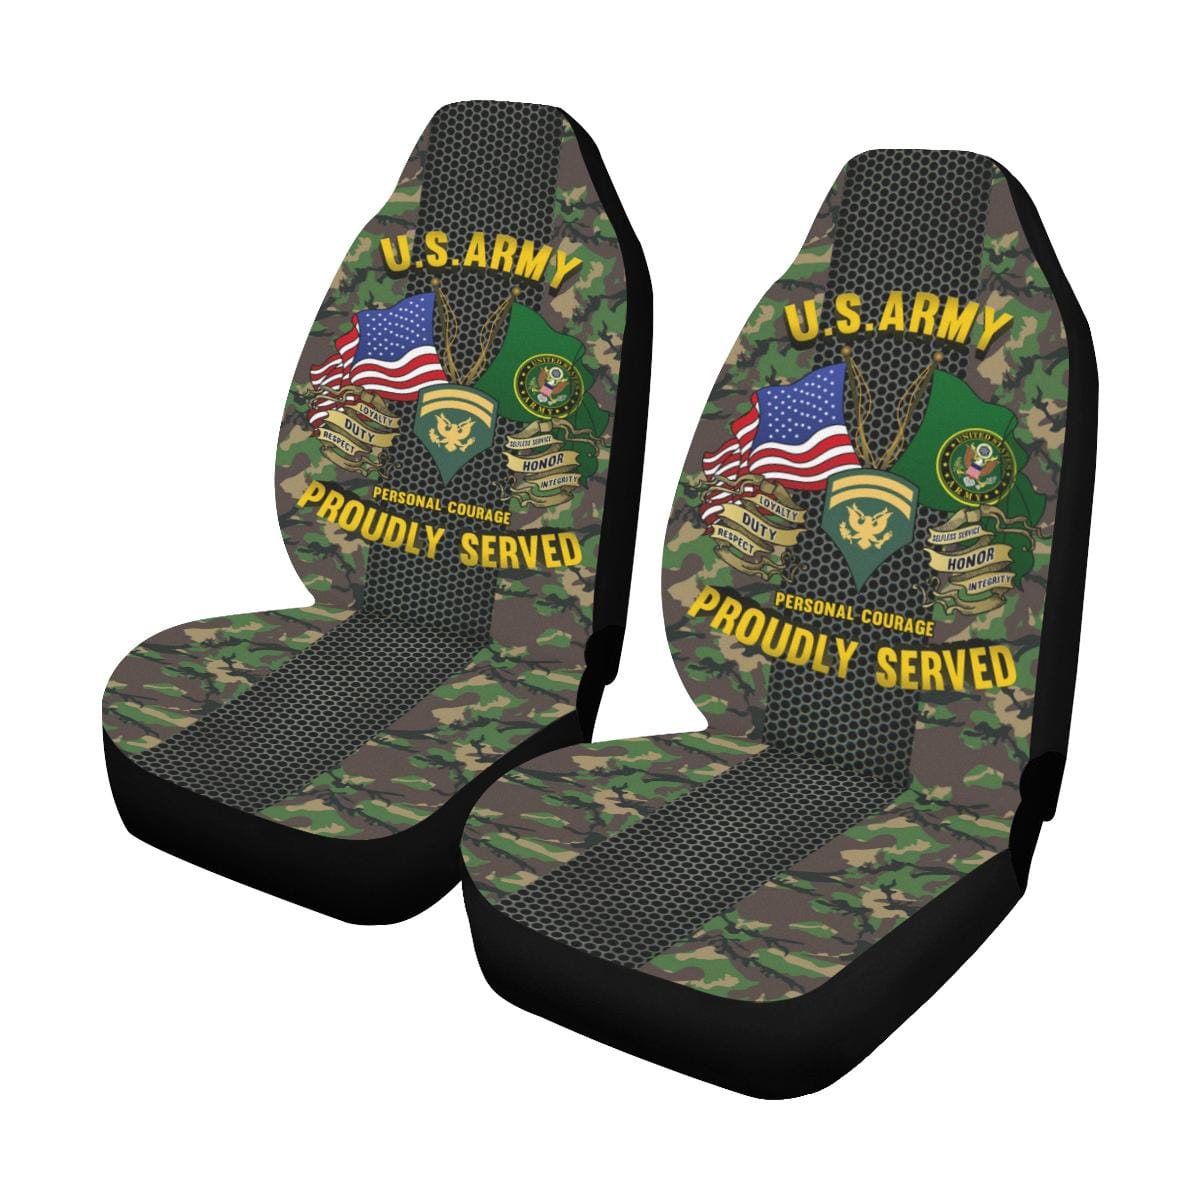 US Army E-6 SPC E6 SP6 Specialist 6 Specialist 1st Class - Car Seat Cov Car Seat Covers (Set of 2)-SeatCovers-Army-Ranks-Veterans Nation